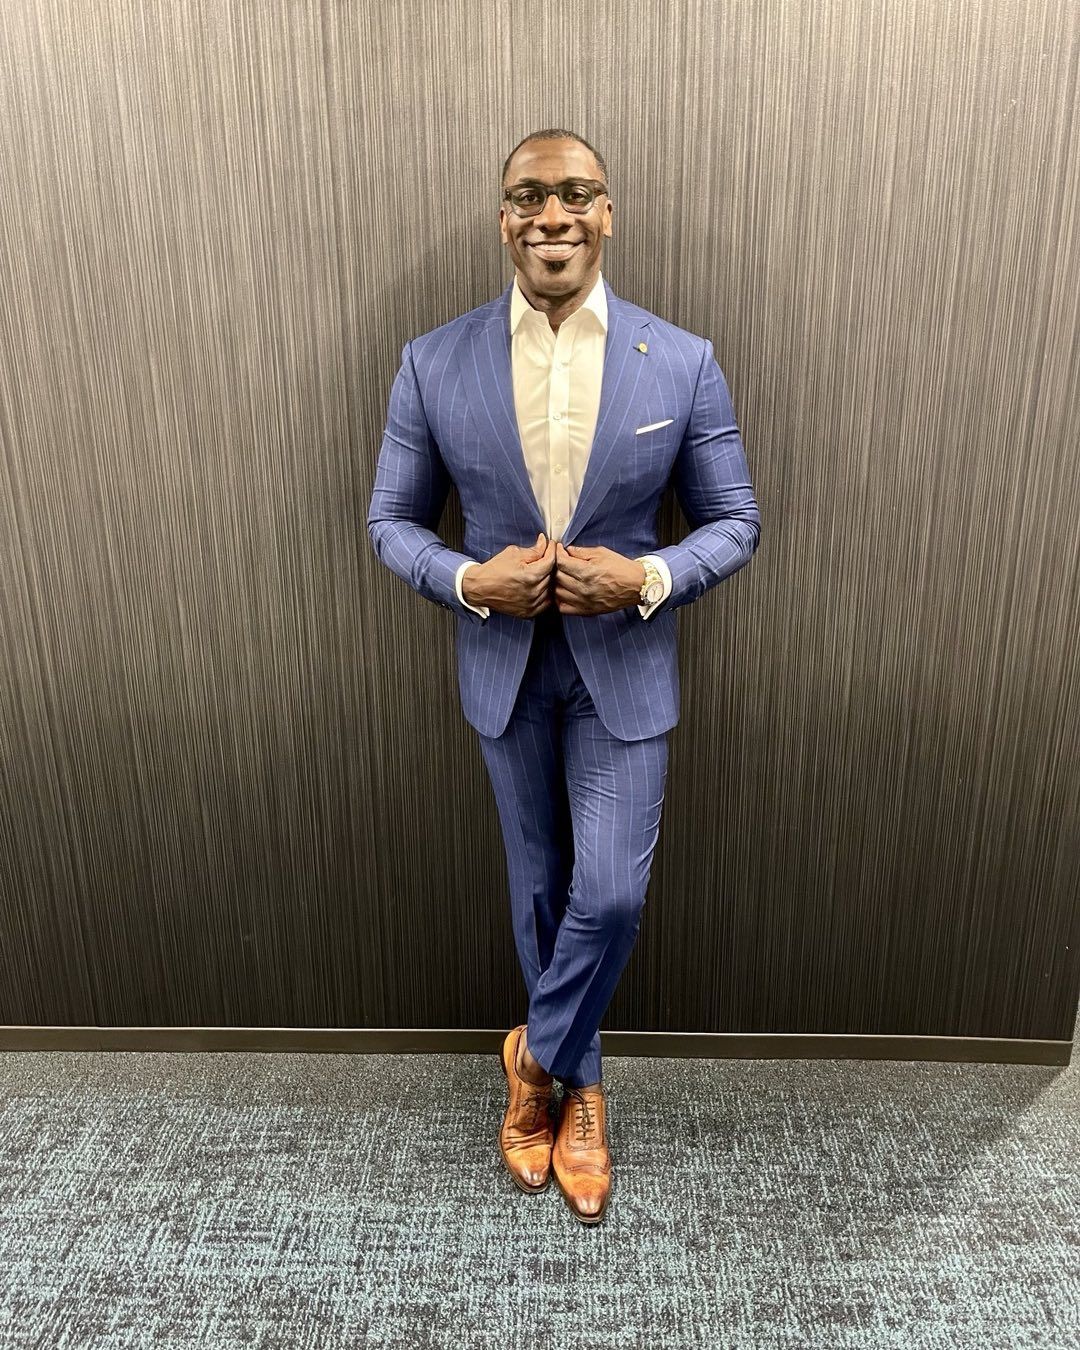 Shannon Sharpe Parents, Wiki, Wife, Family, Age, Net Worth